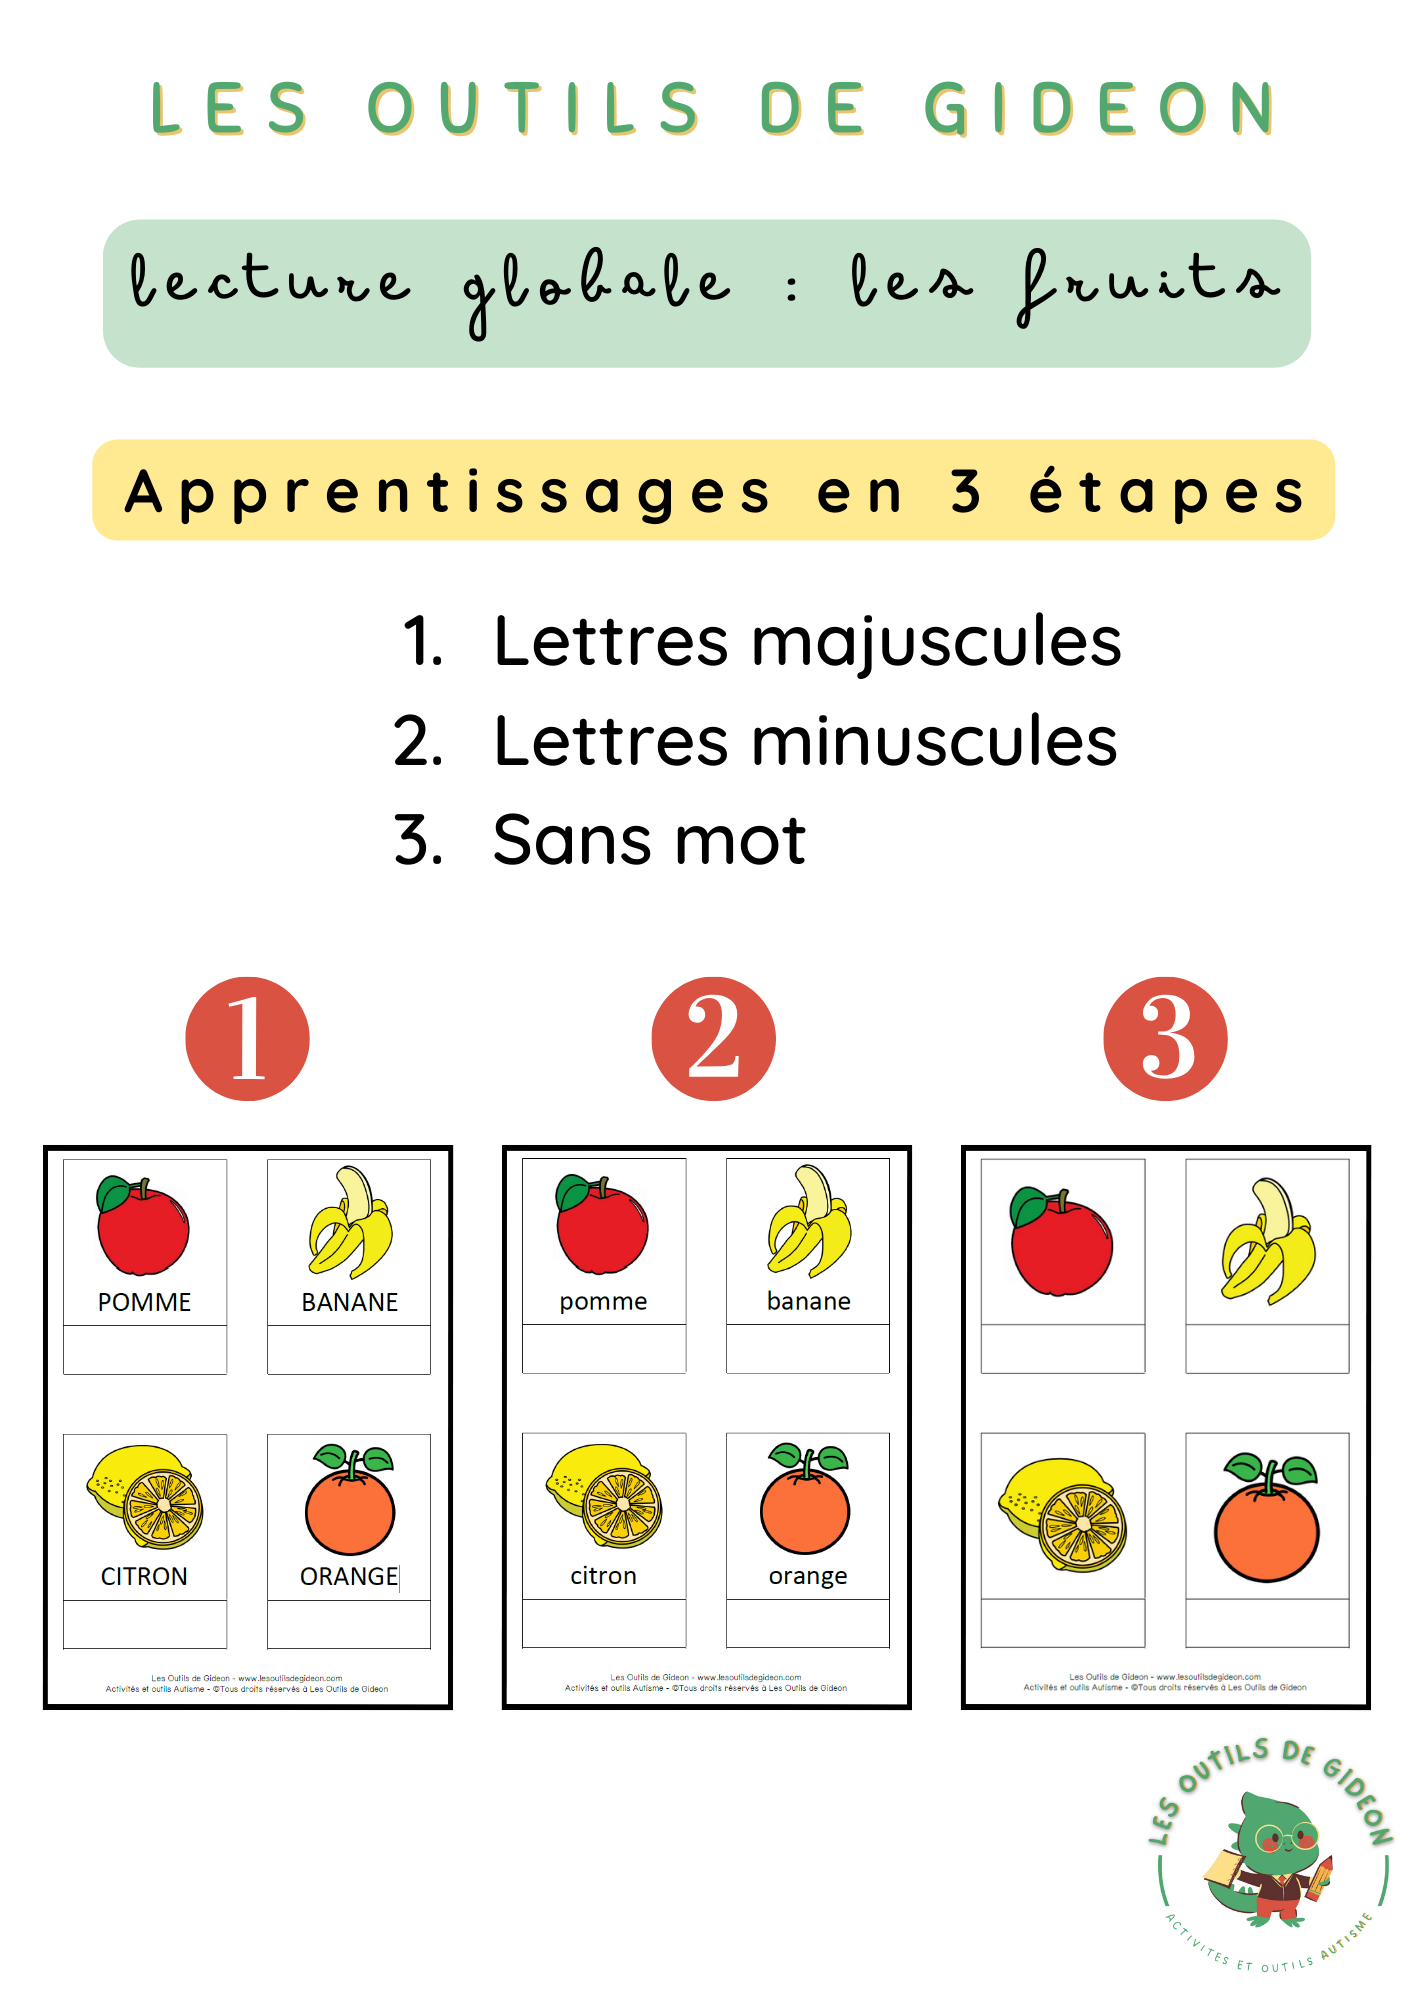 Lecture Globale : Les fruits